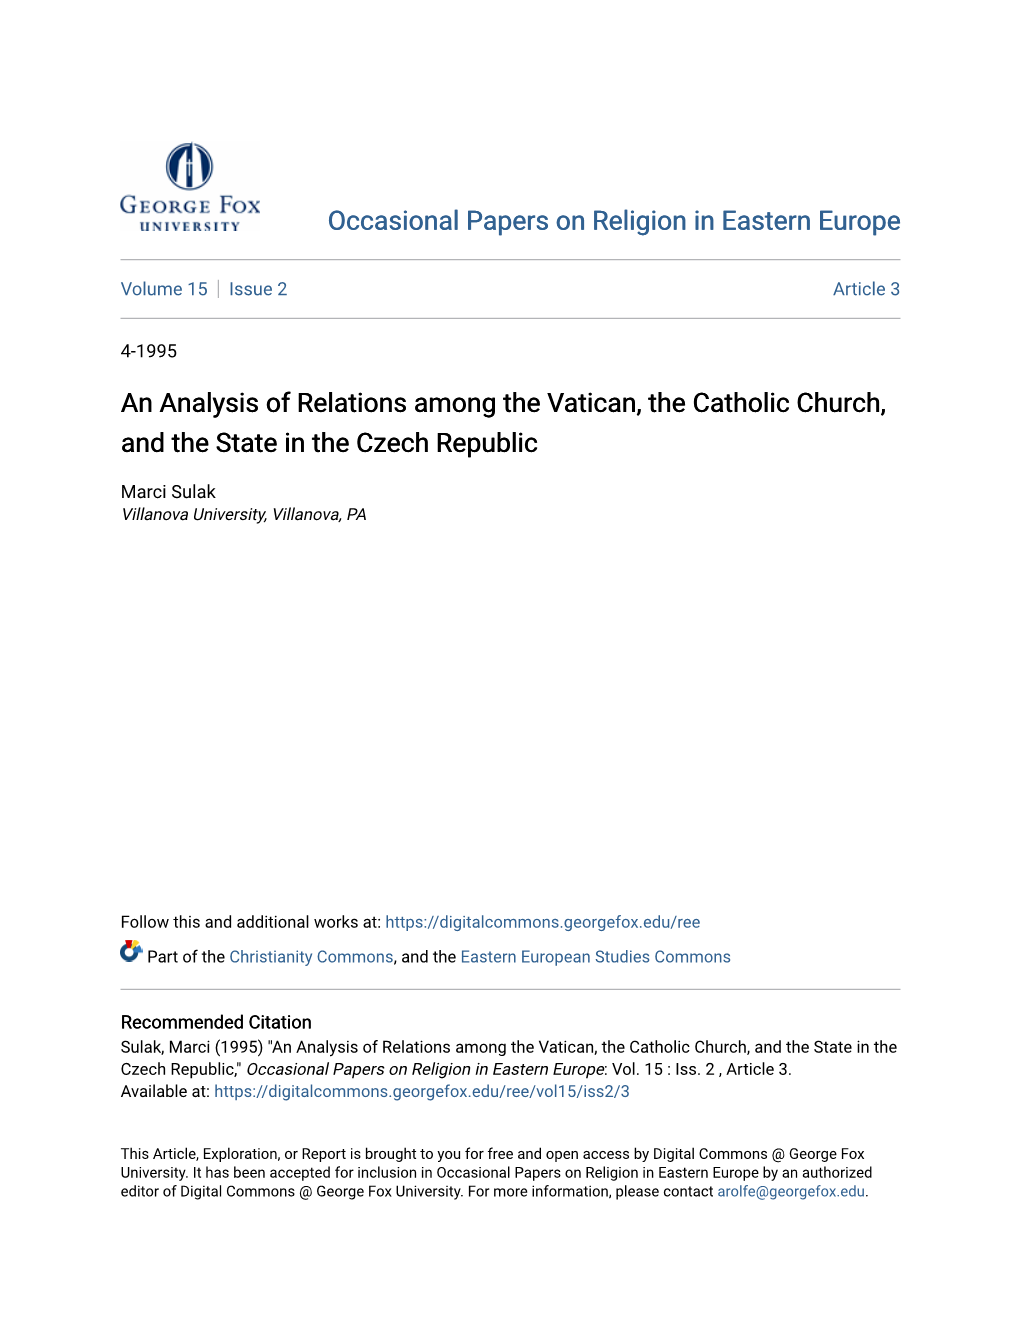 An Analysis of Relations Among the Vatican, the Catholic Church, and the State in the Czech Republic